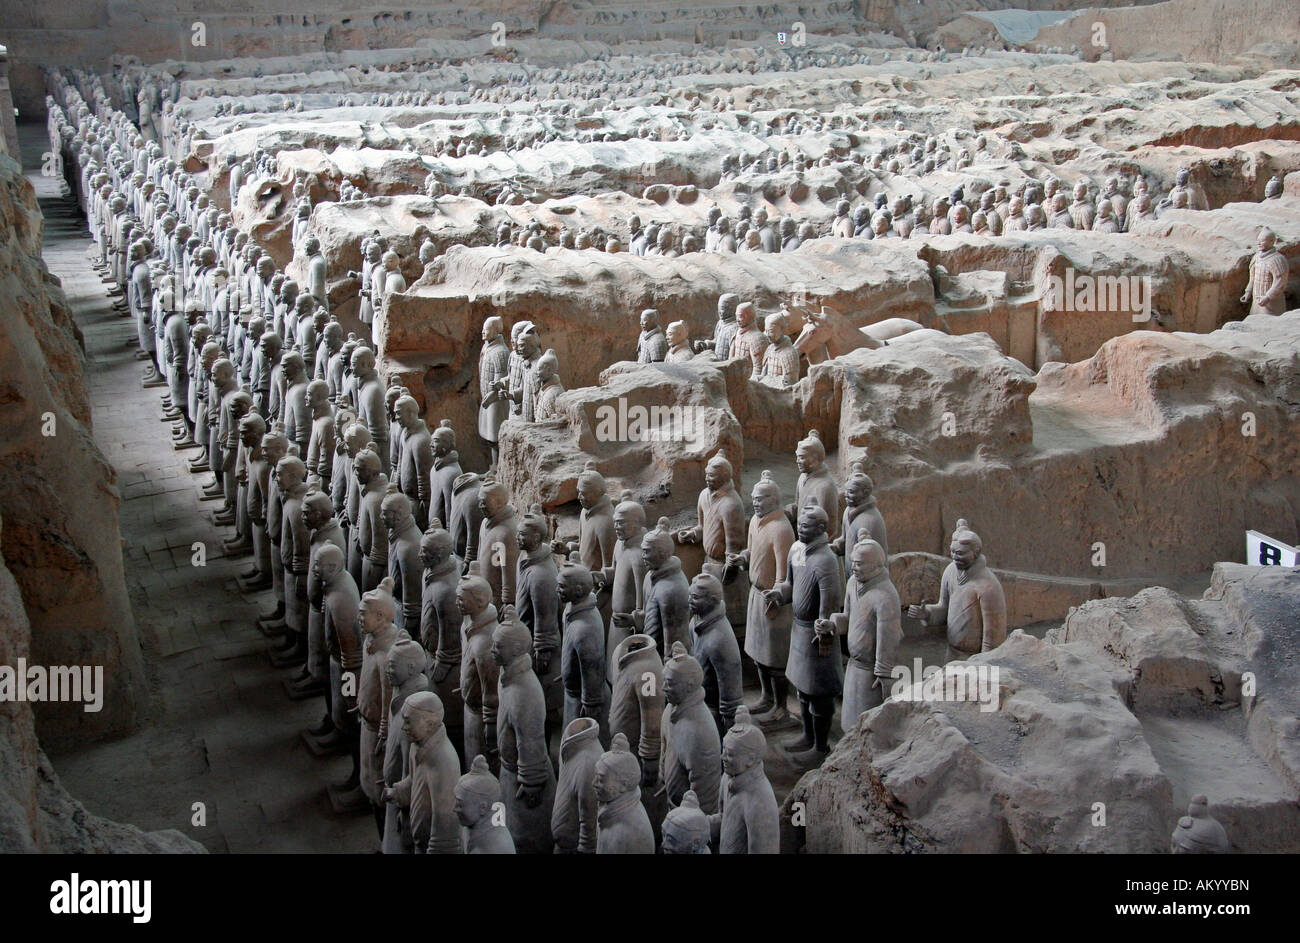 Terracotta Army, Mausoleum of the First Qin Emperor near Xi'an, China Stock Photo